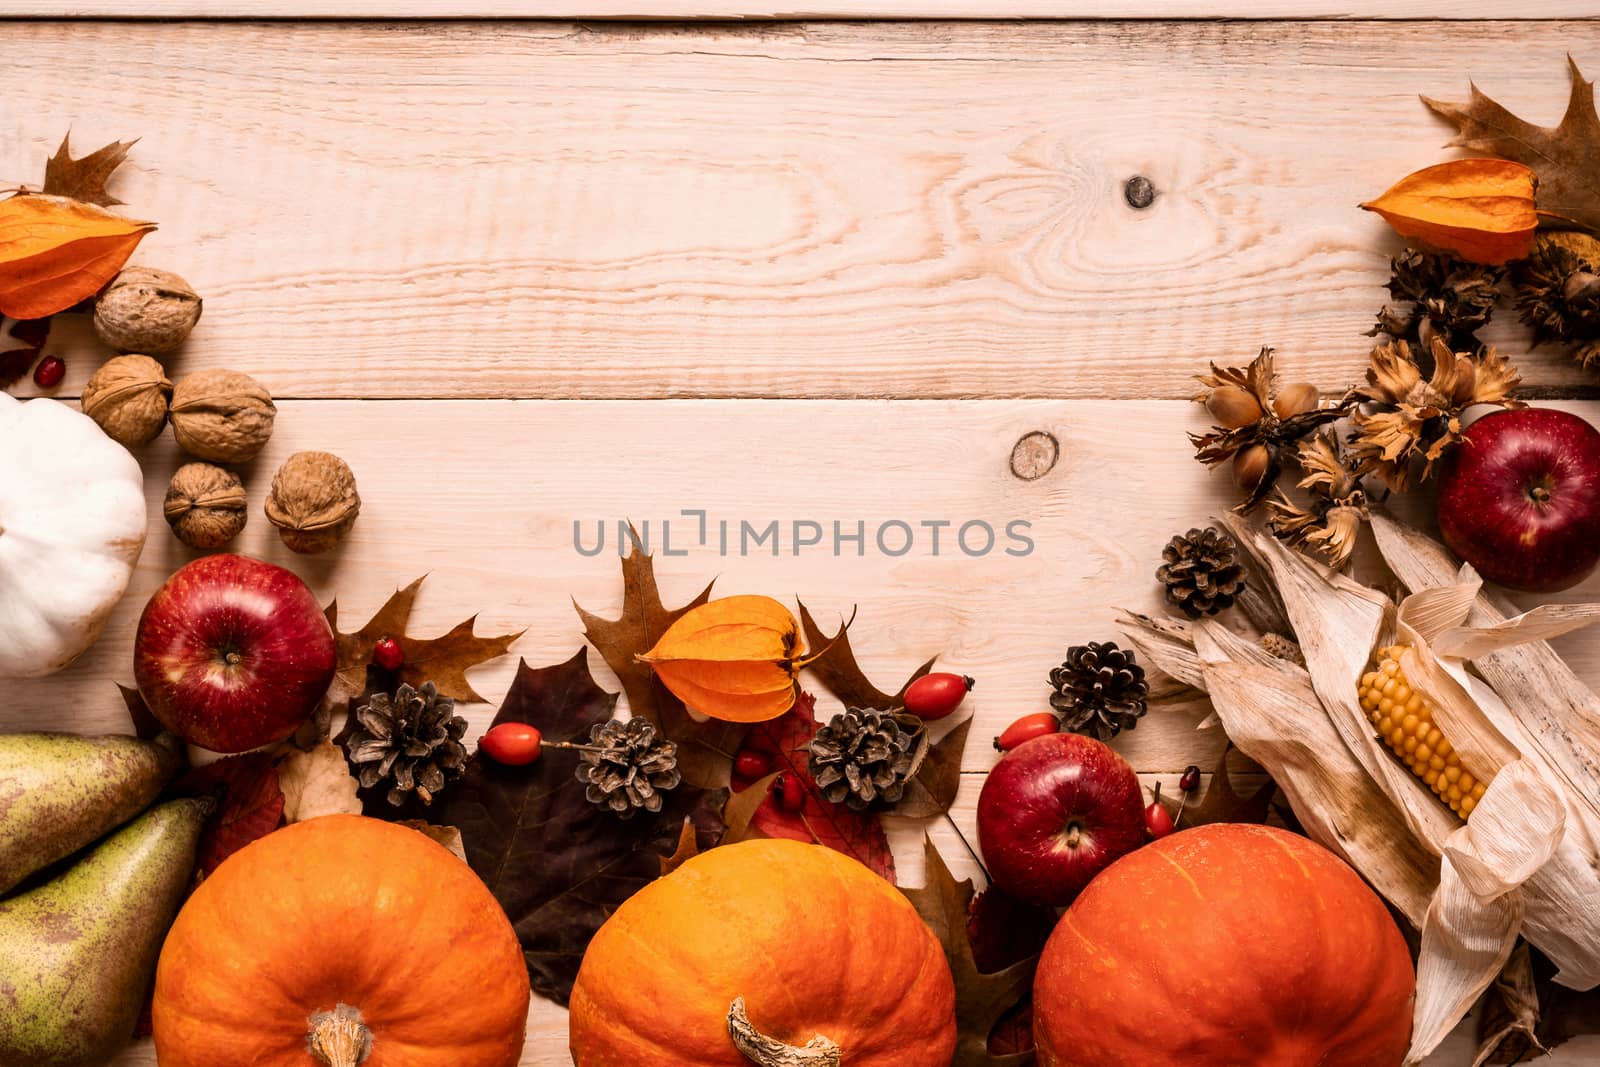 Harvest concept. Autumn crops, pumpkins, corn, apples, pears and fruit on a wooden board. Copy space.